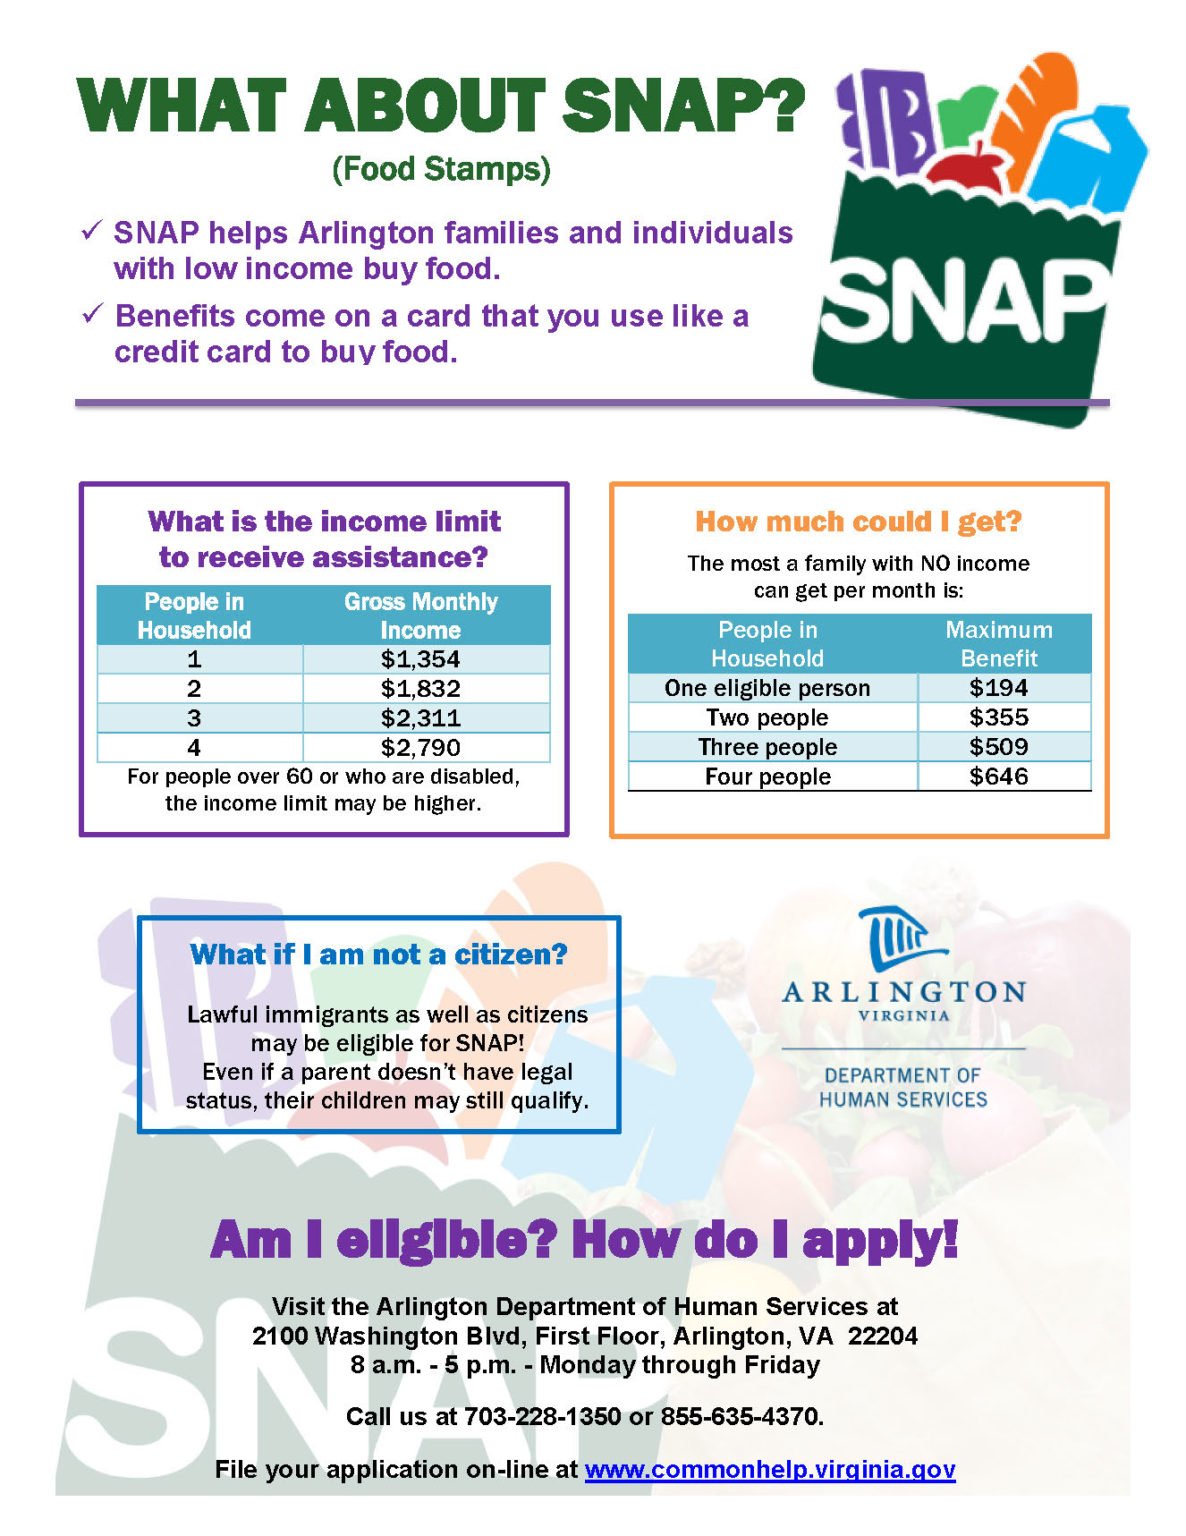 SNAP / Food Stamps